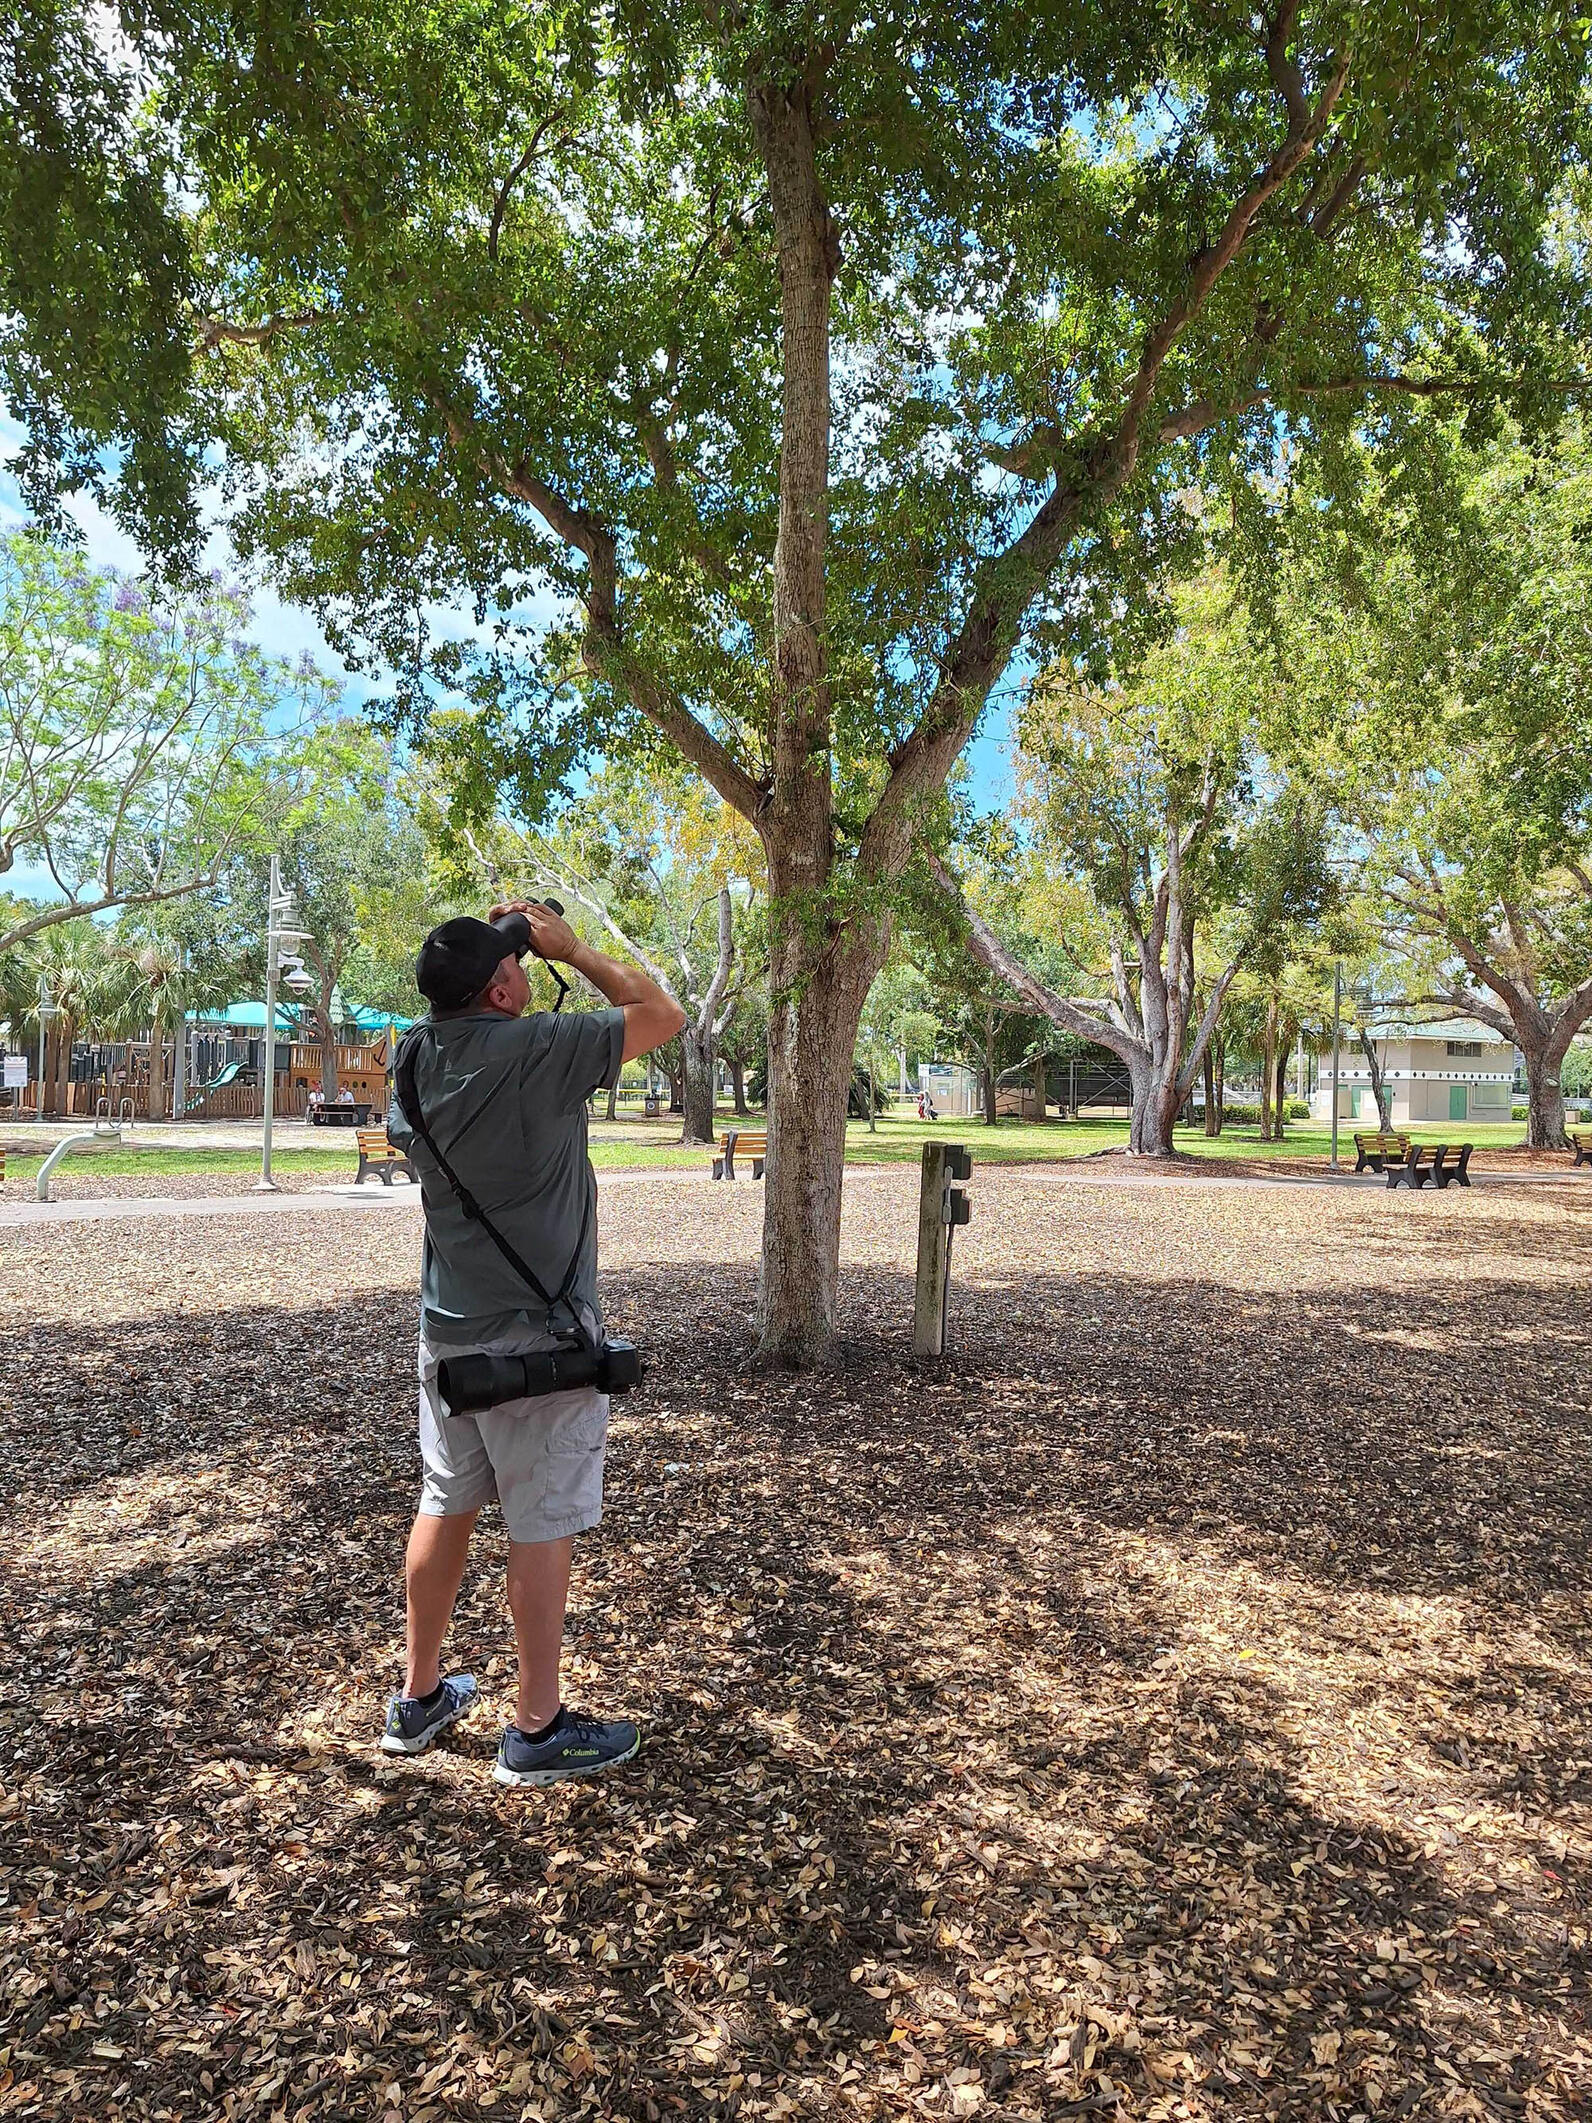 A man standing in a park looking up with binoculars.